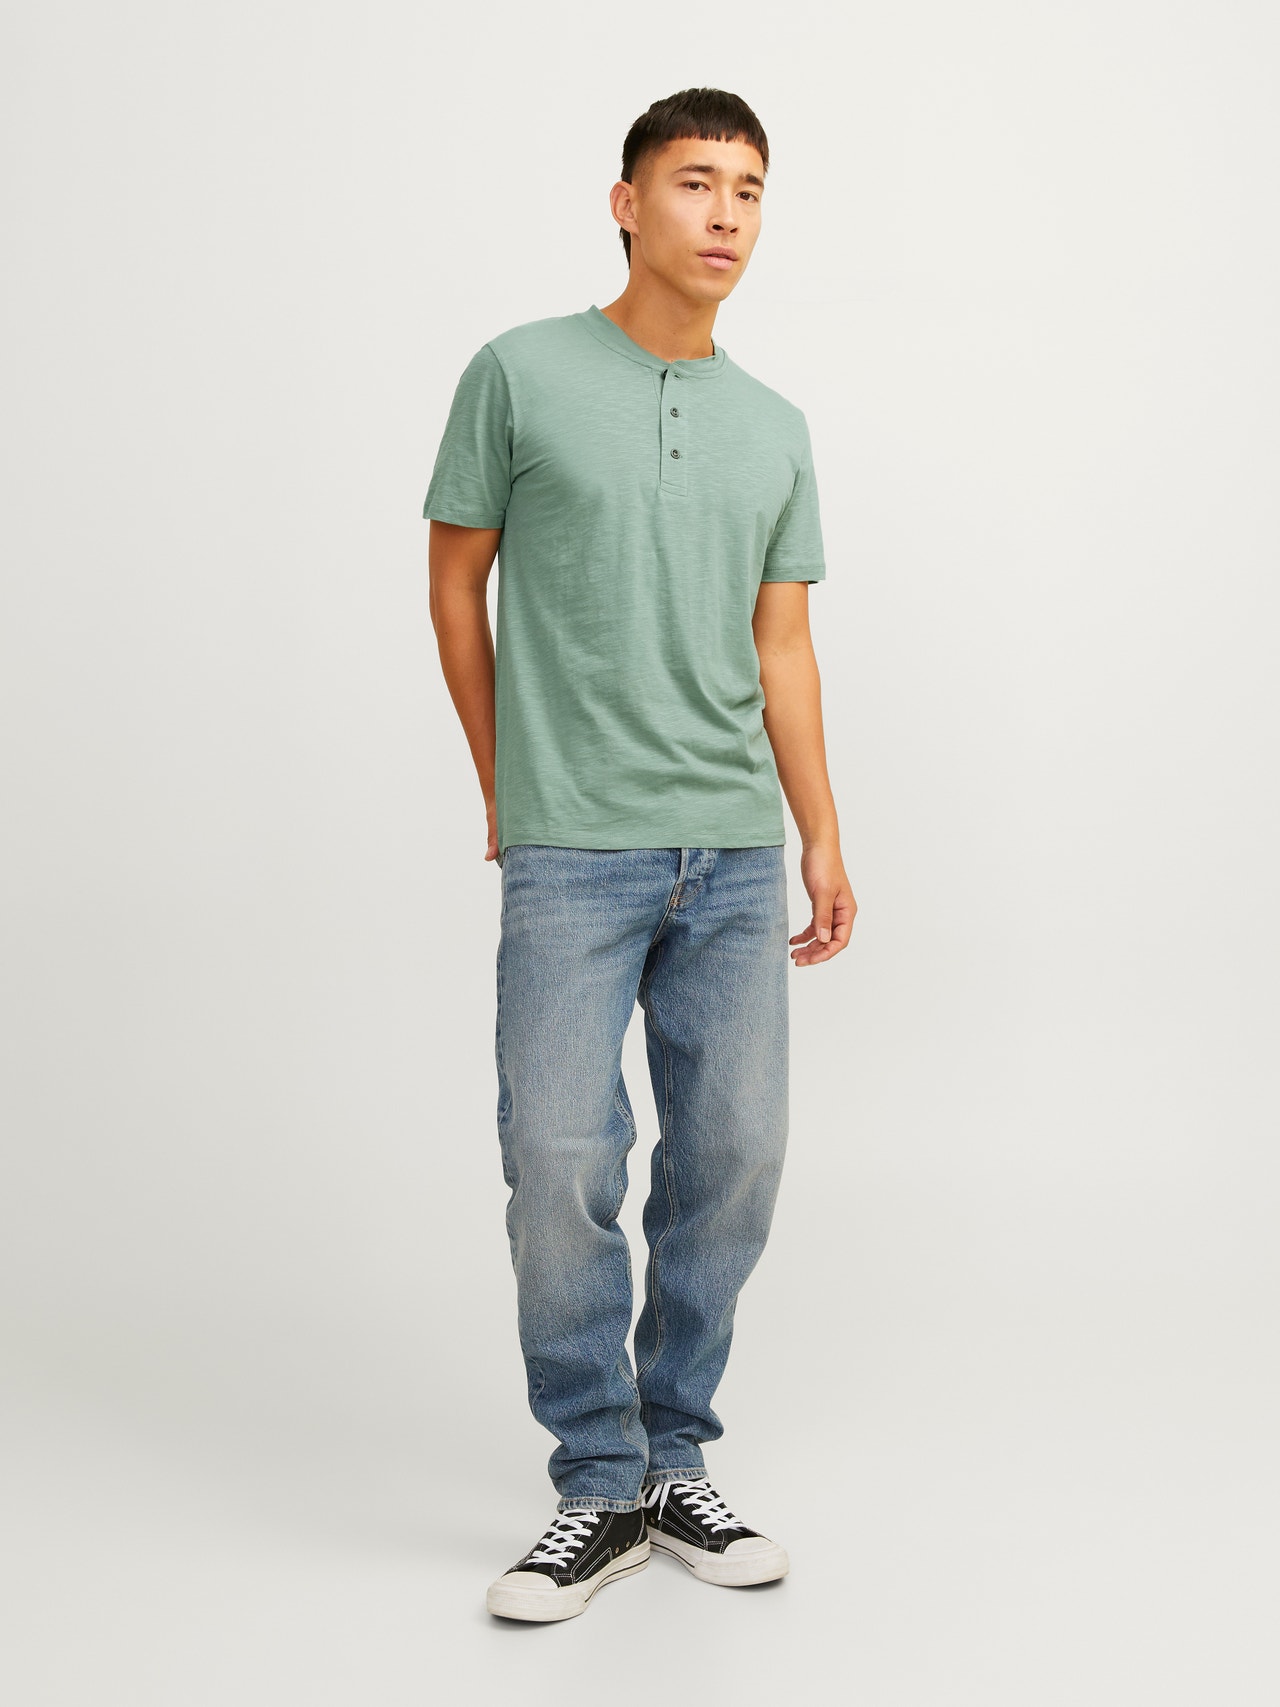 Jack & Jones T-shirt Semplice Colletto Cinese -Lily Pad - 12257965